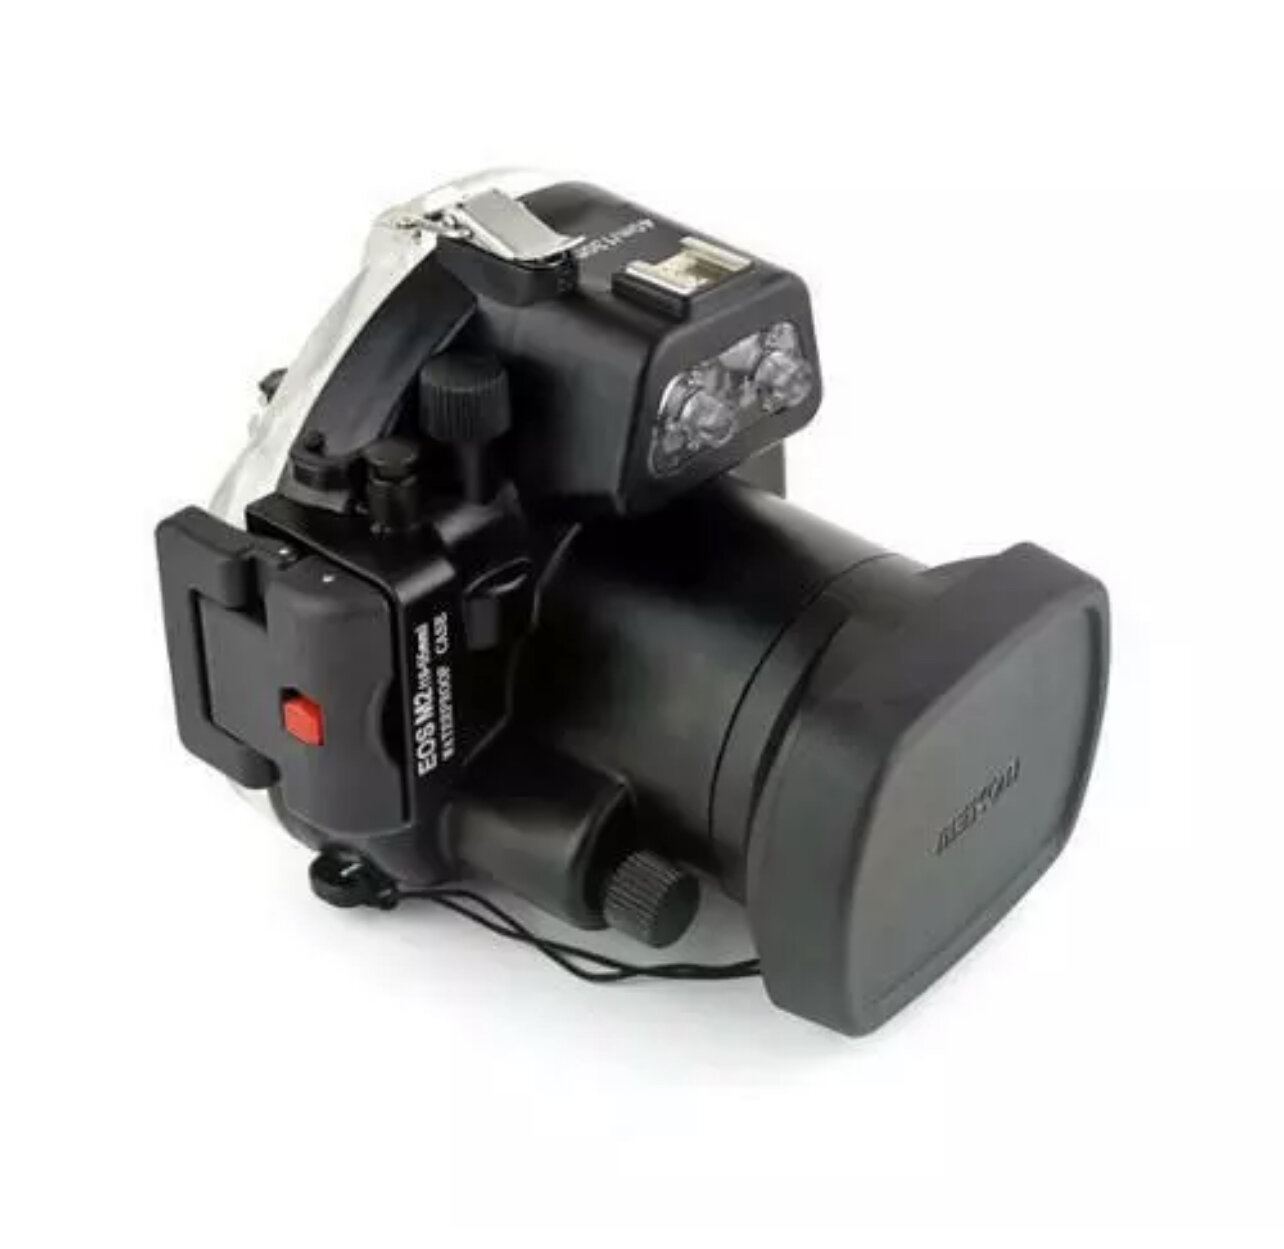 Seafrogs Underwater Housing for the Canon EOS M